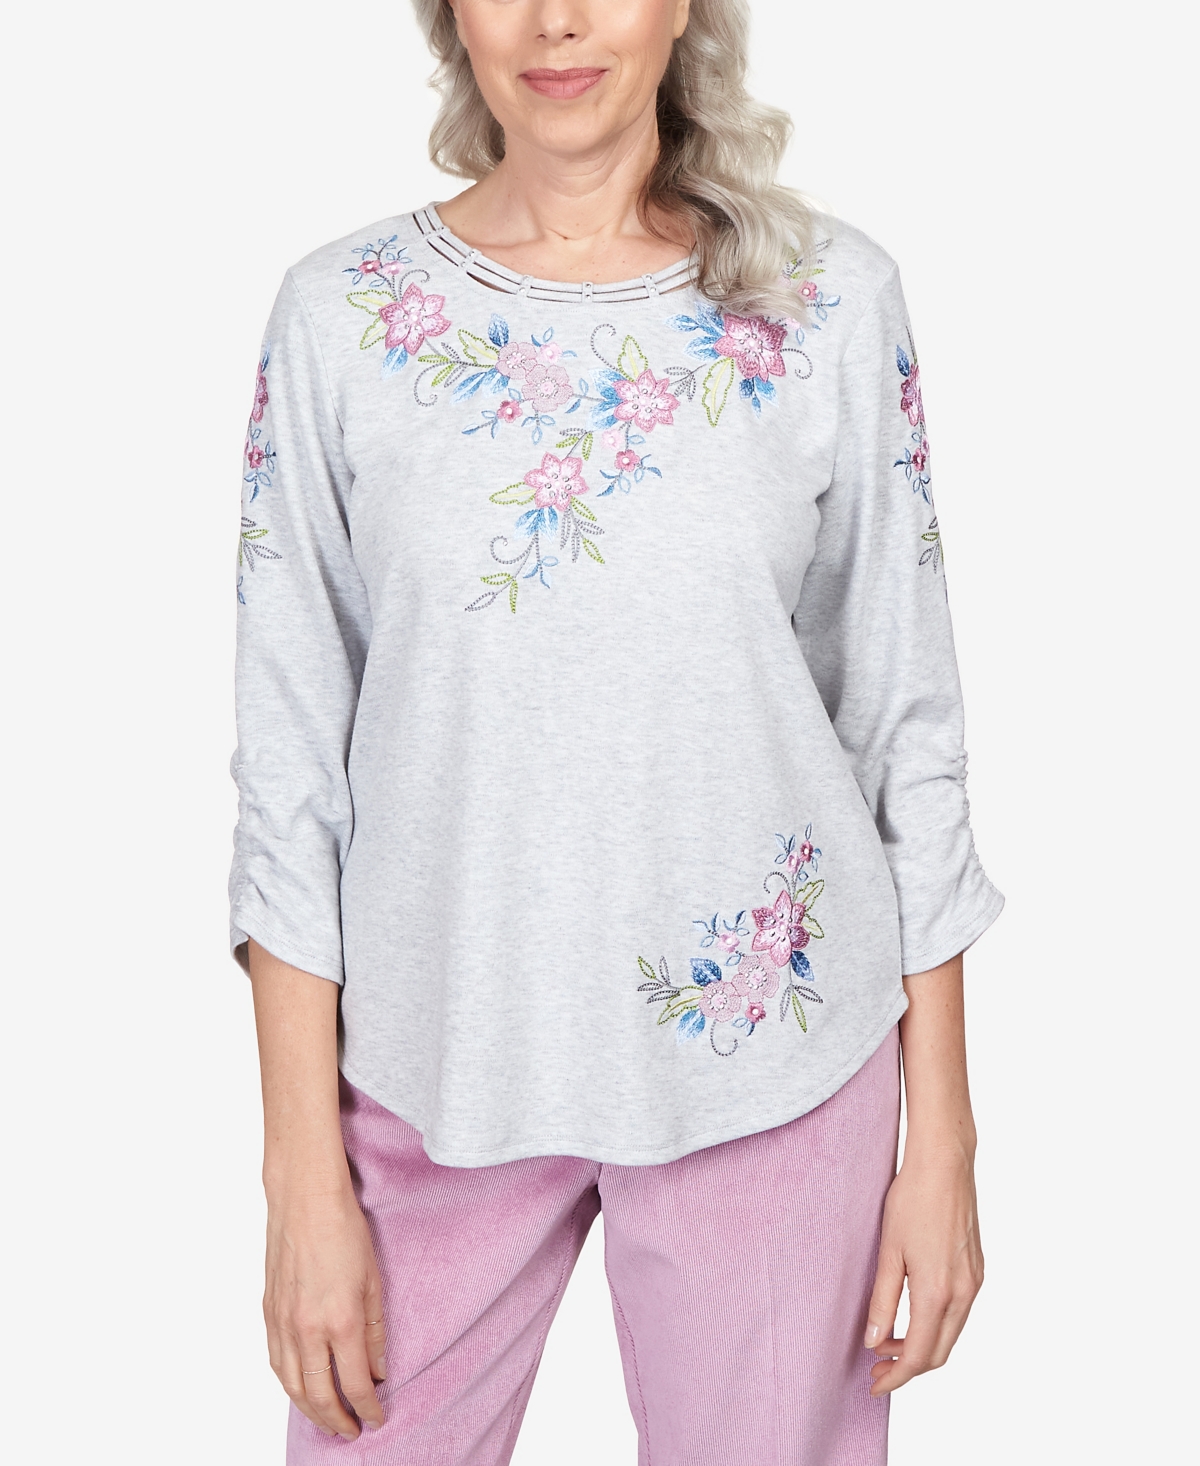 ALFRED DUNNER PETITE SWISS CHALET FLORAL YOKE EMBROIDERED DOUBLE STRAP TOP